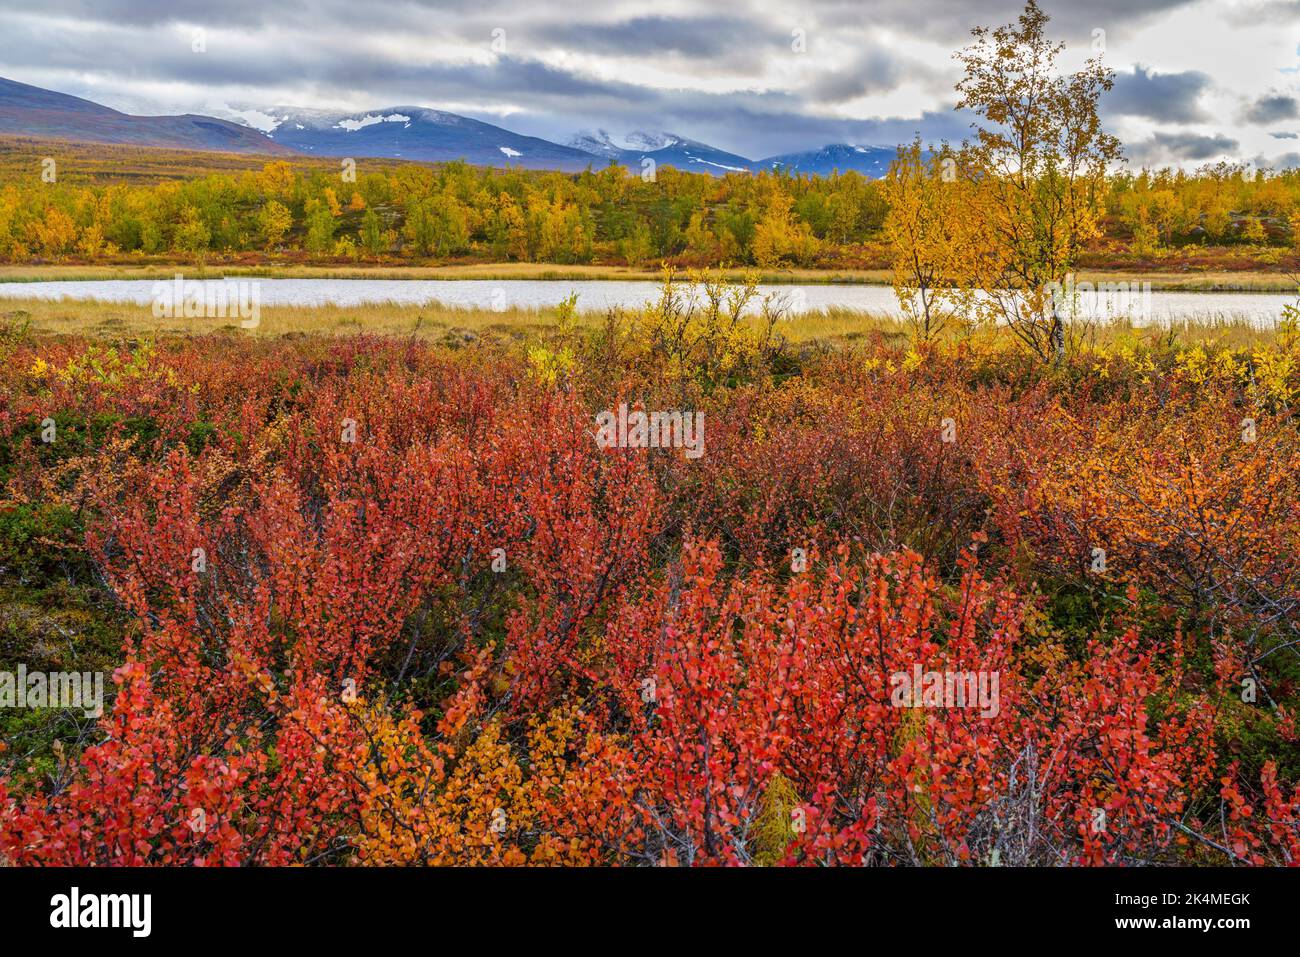 Autumn landscape with mountains in background and a lake, colorfull trees, Abisko, Swedish Lapland, Sweden. Stock Photo